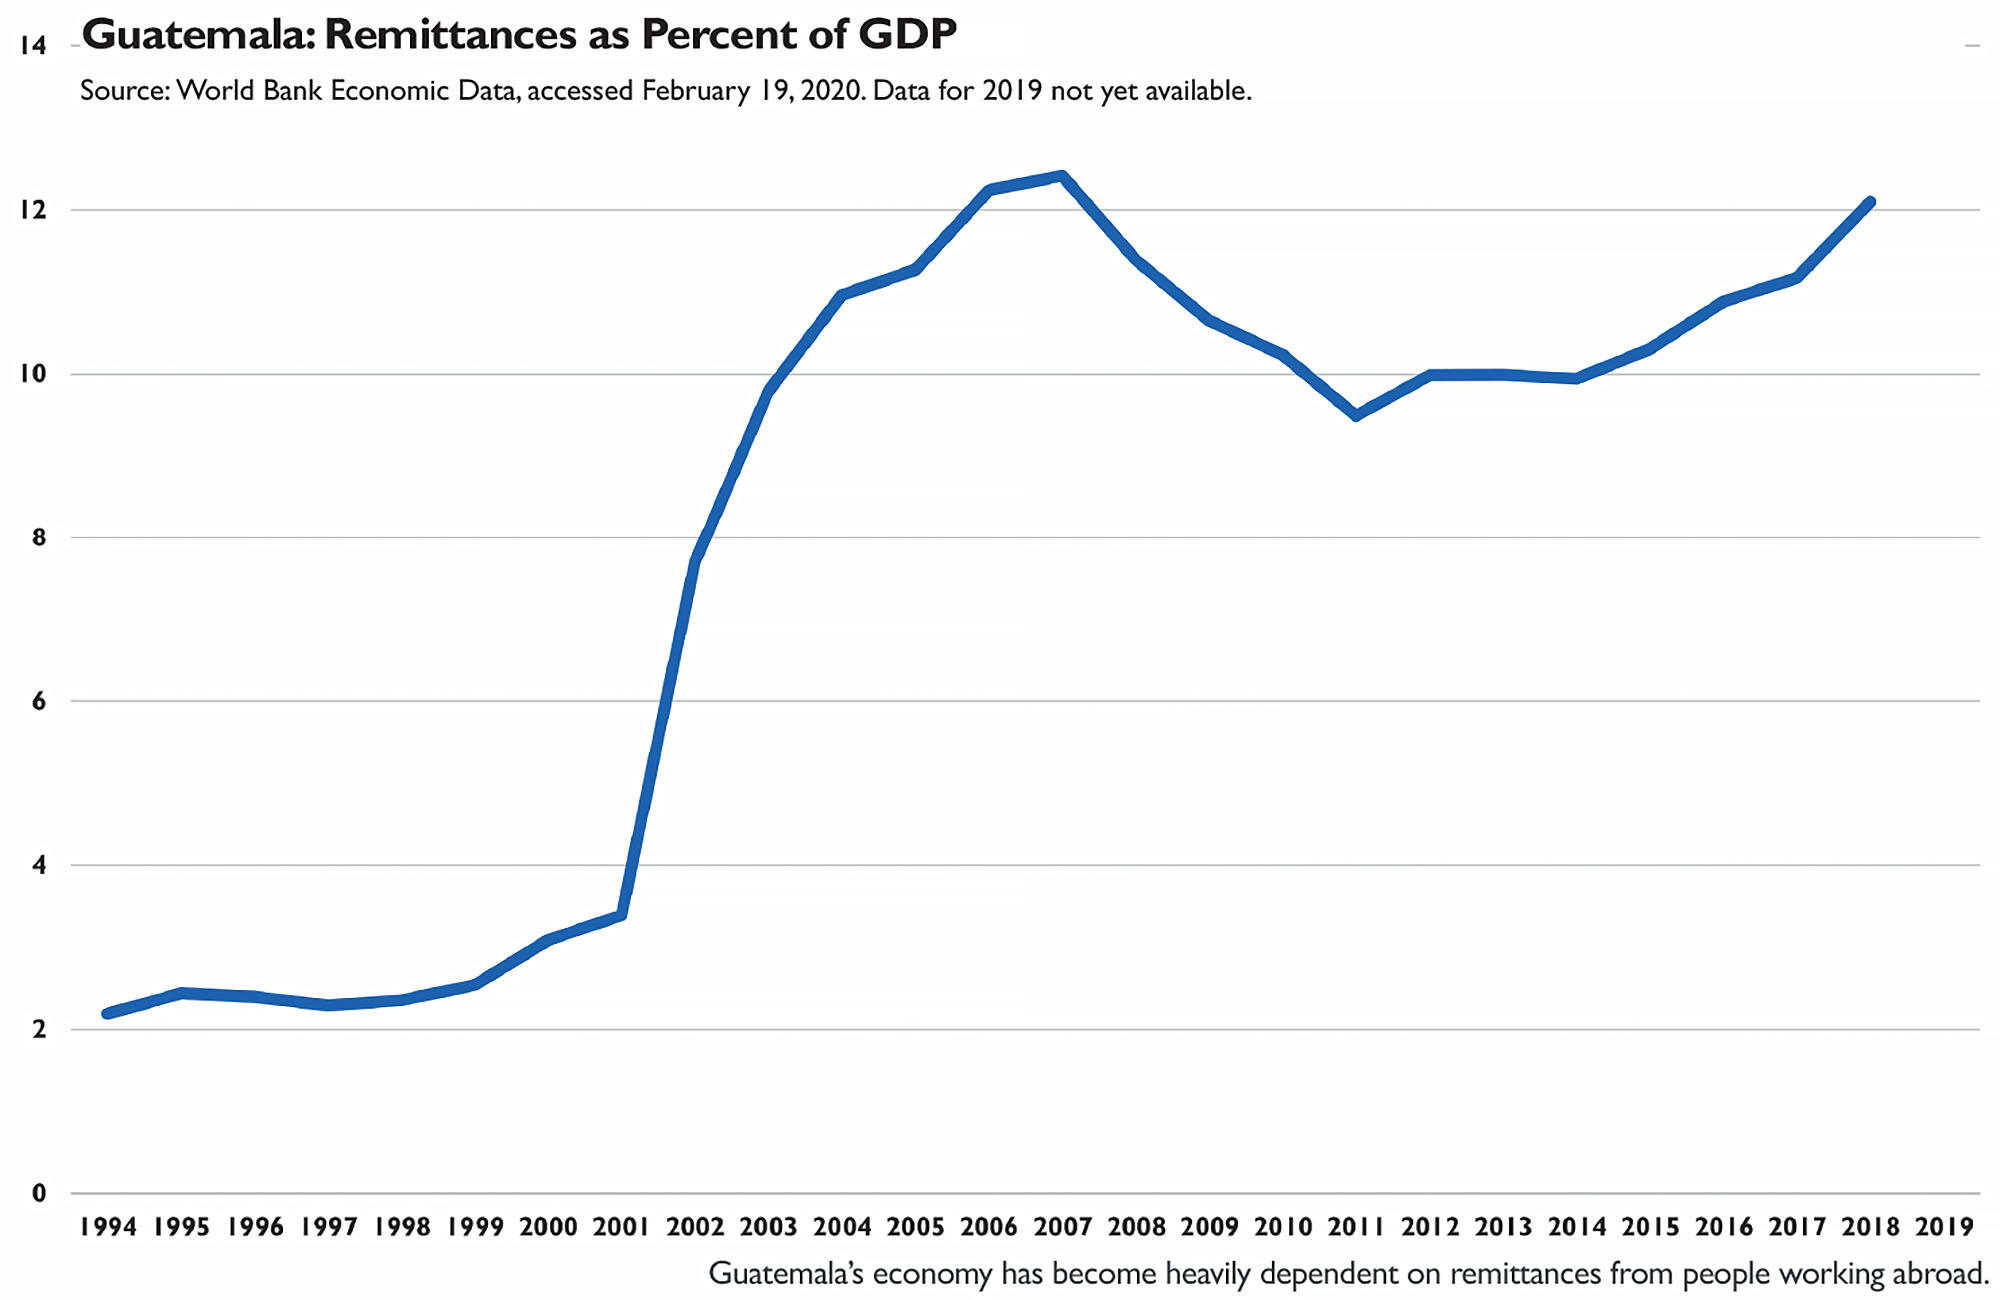 Guatemala’s economy has become heavily dependent on remittances from people working abroad.